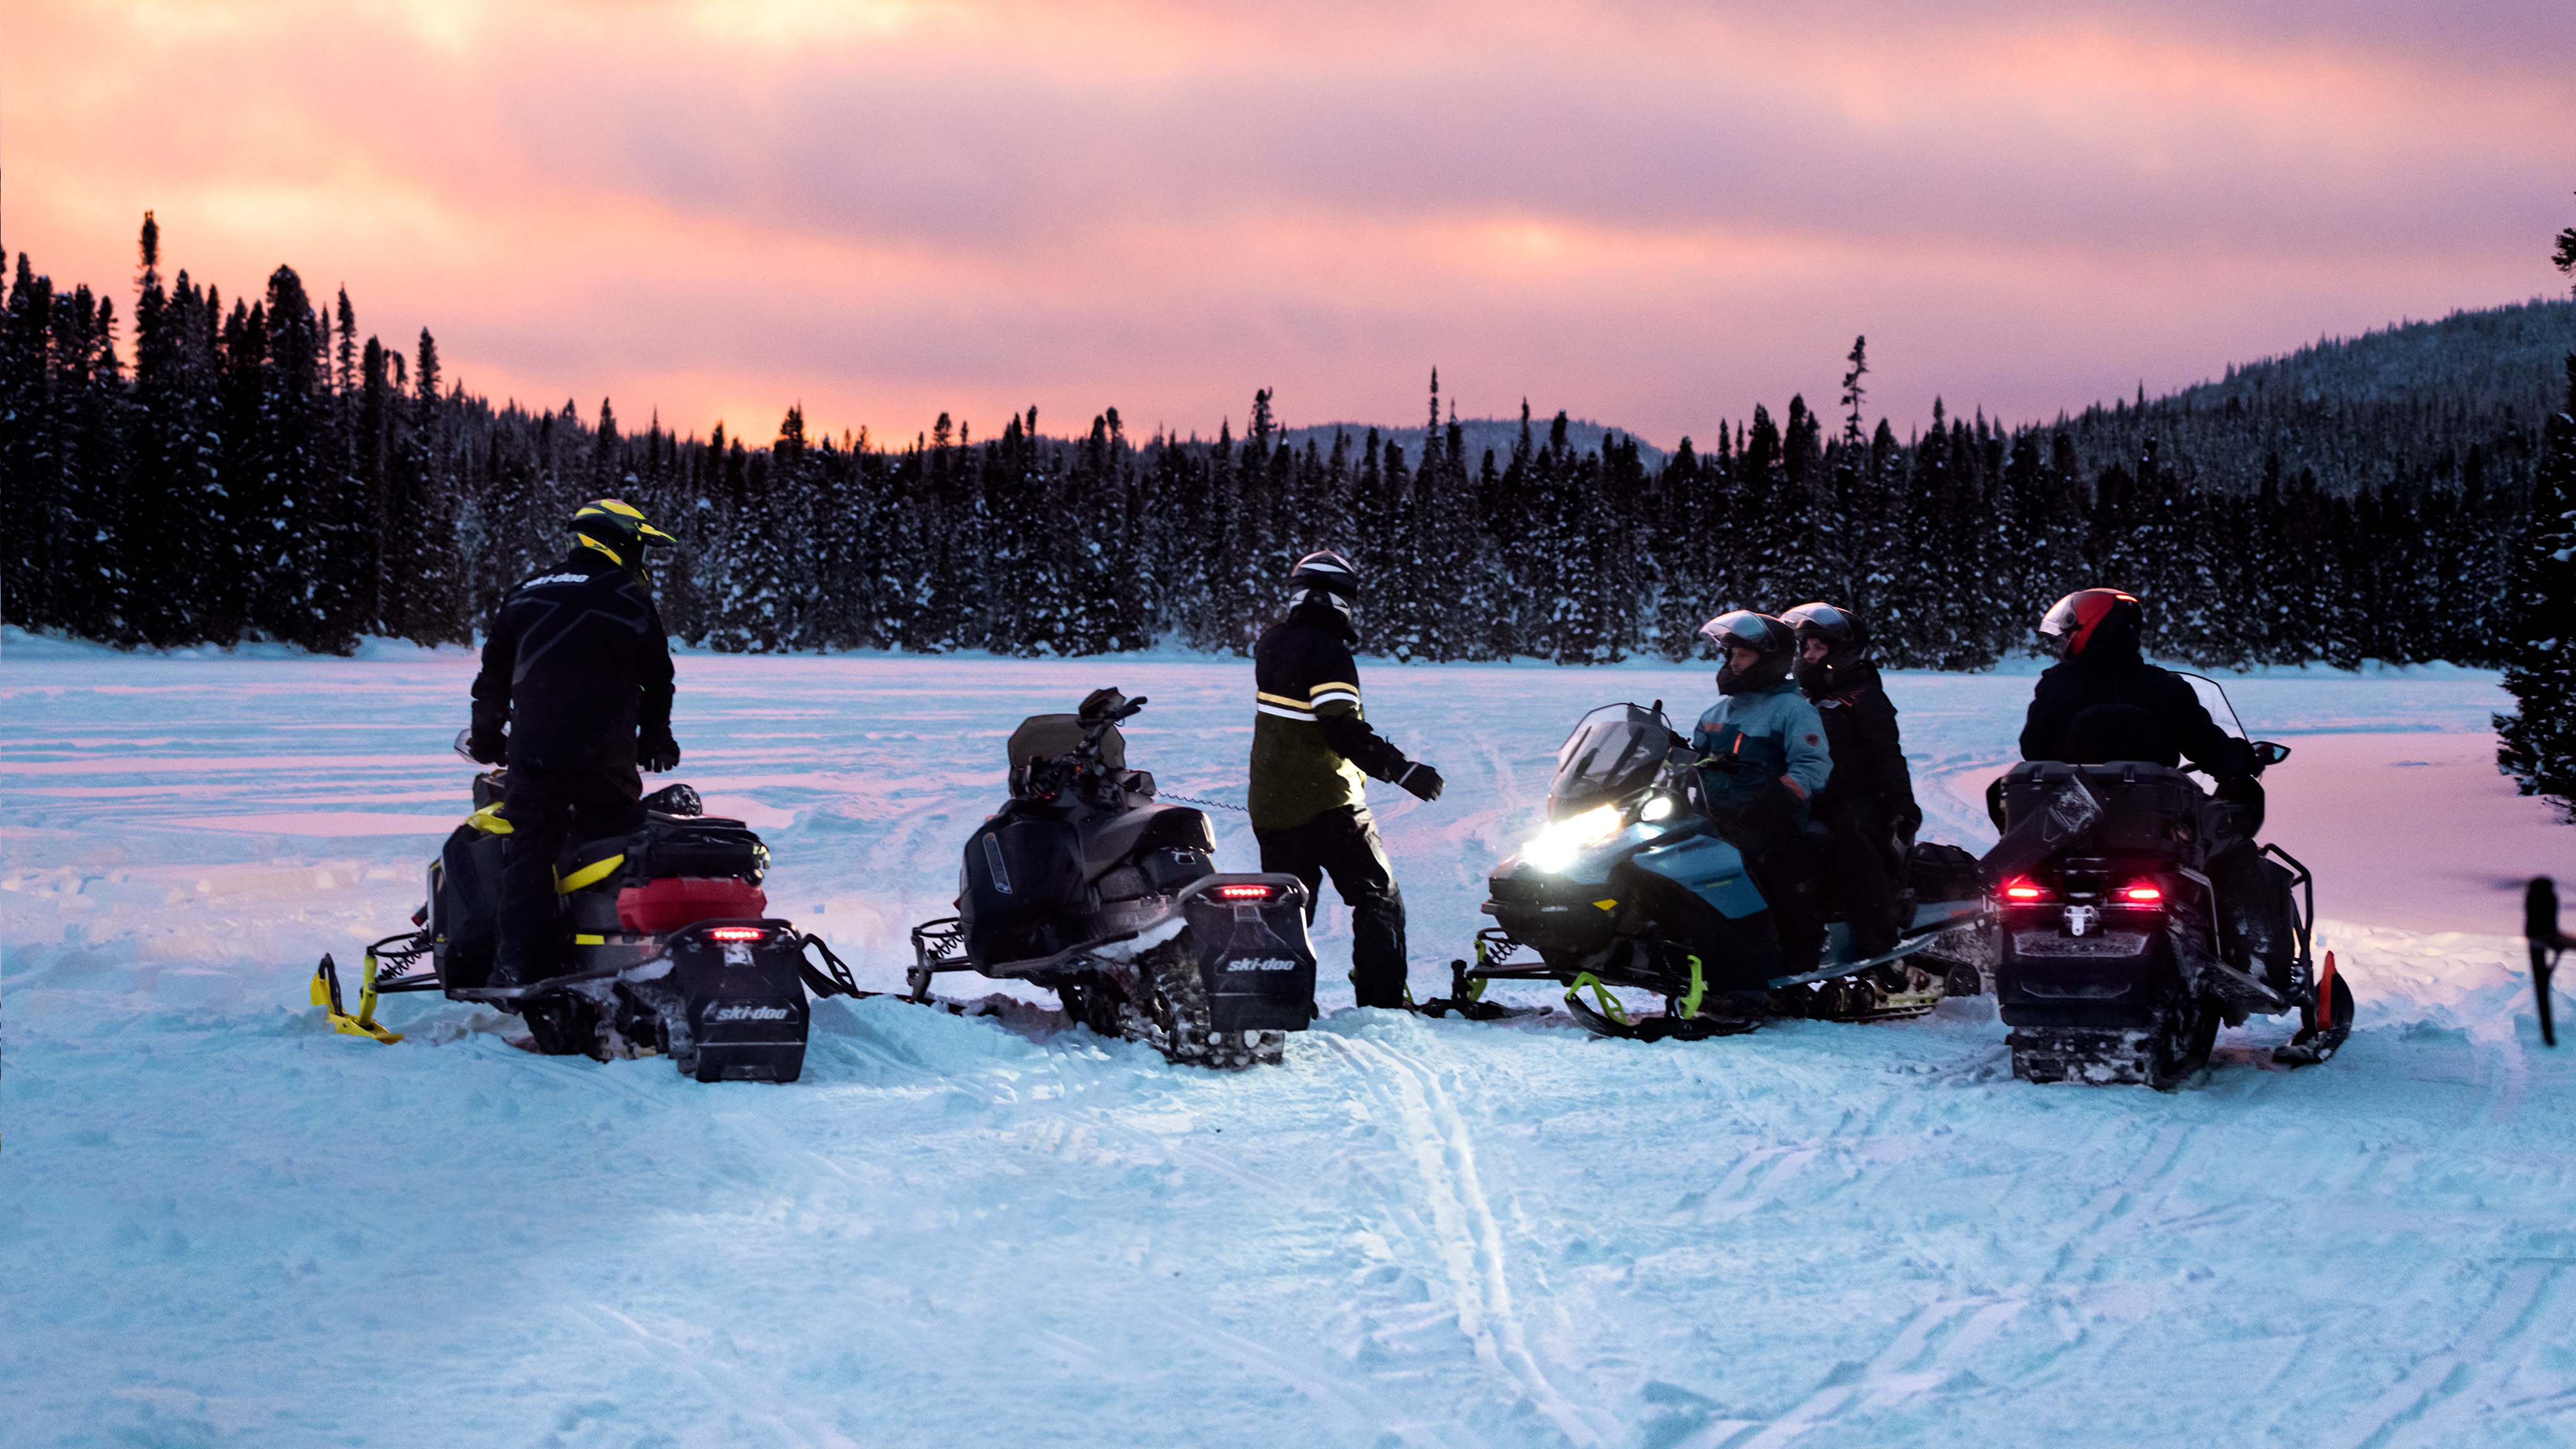 5 Ski-Doo riders stopped in a clearing